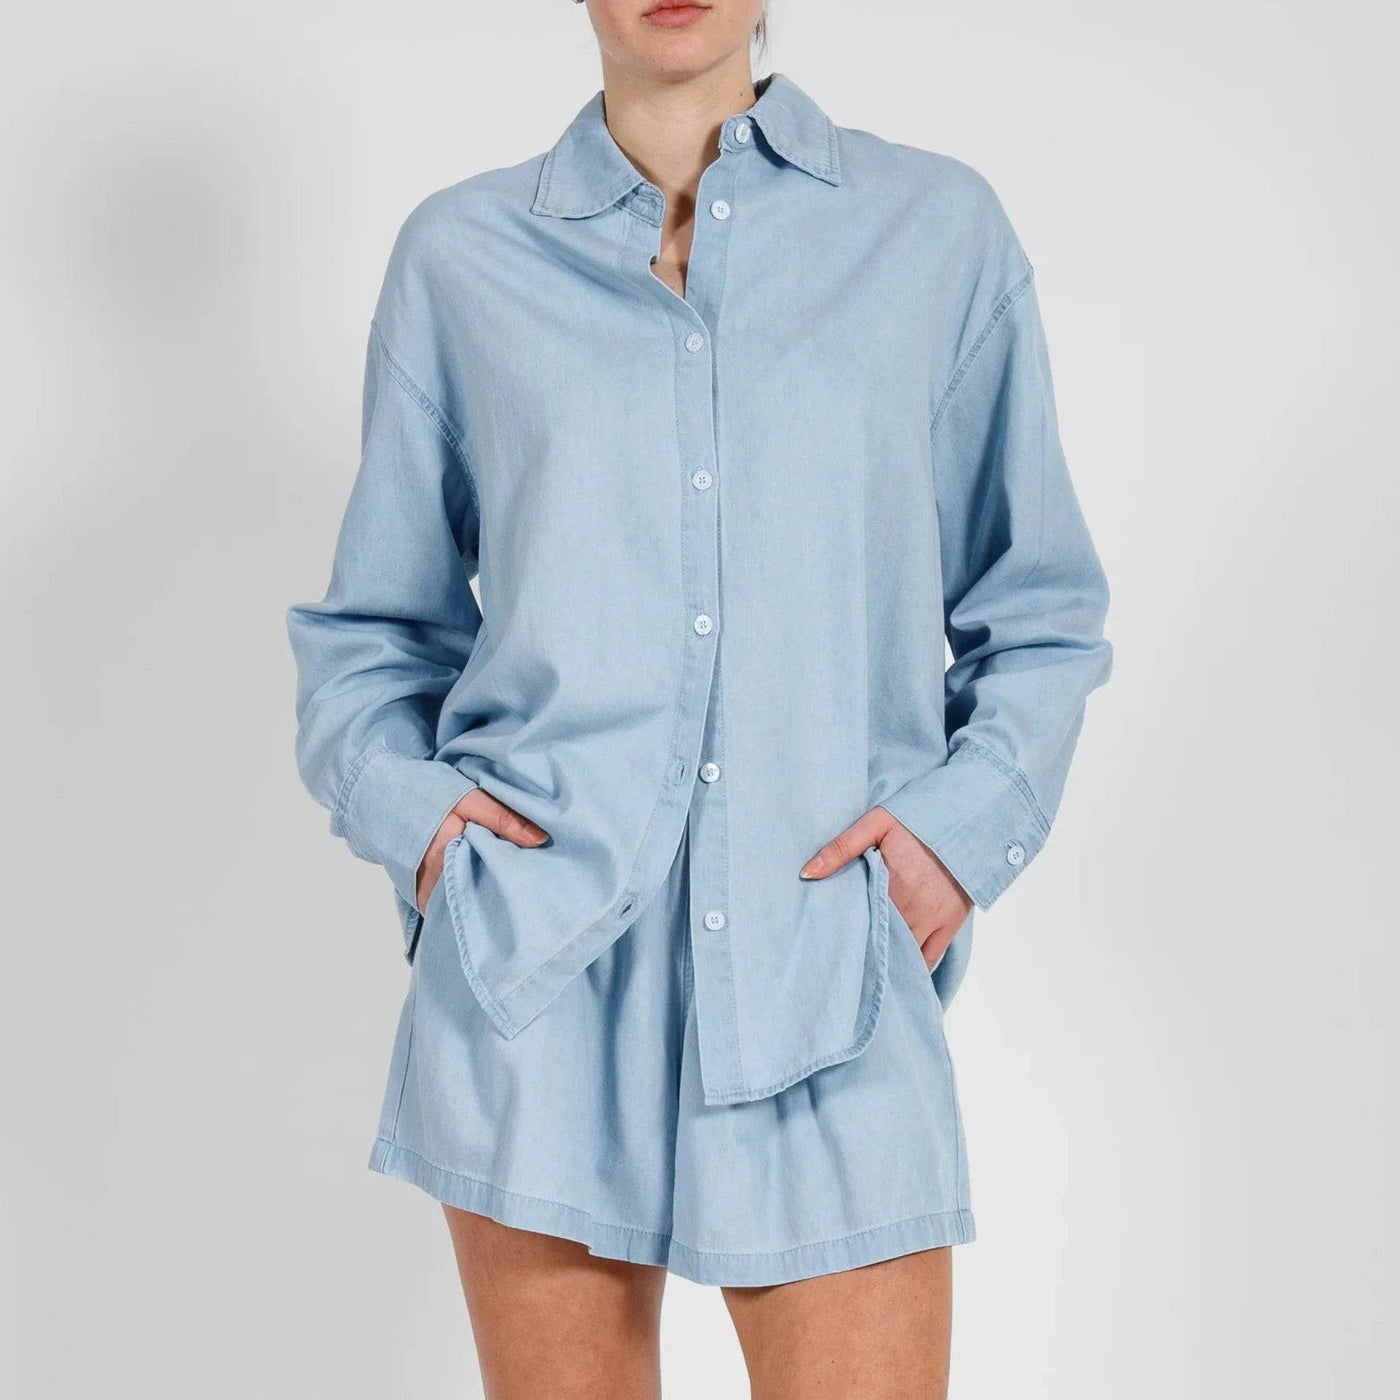 Chambray Denim Button Up Shirt - The Local Space